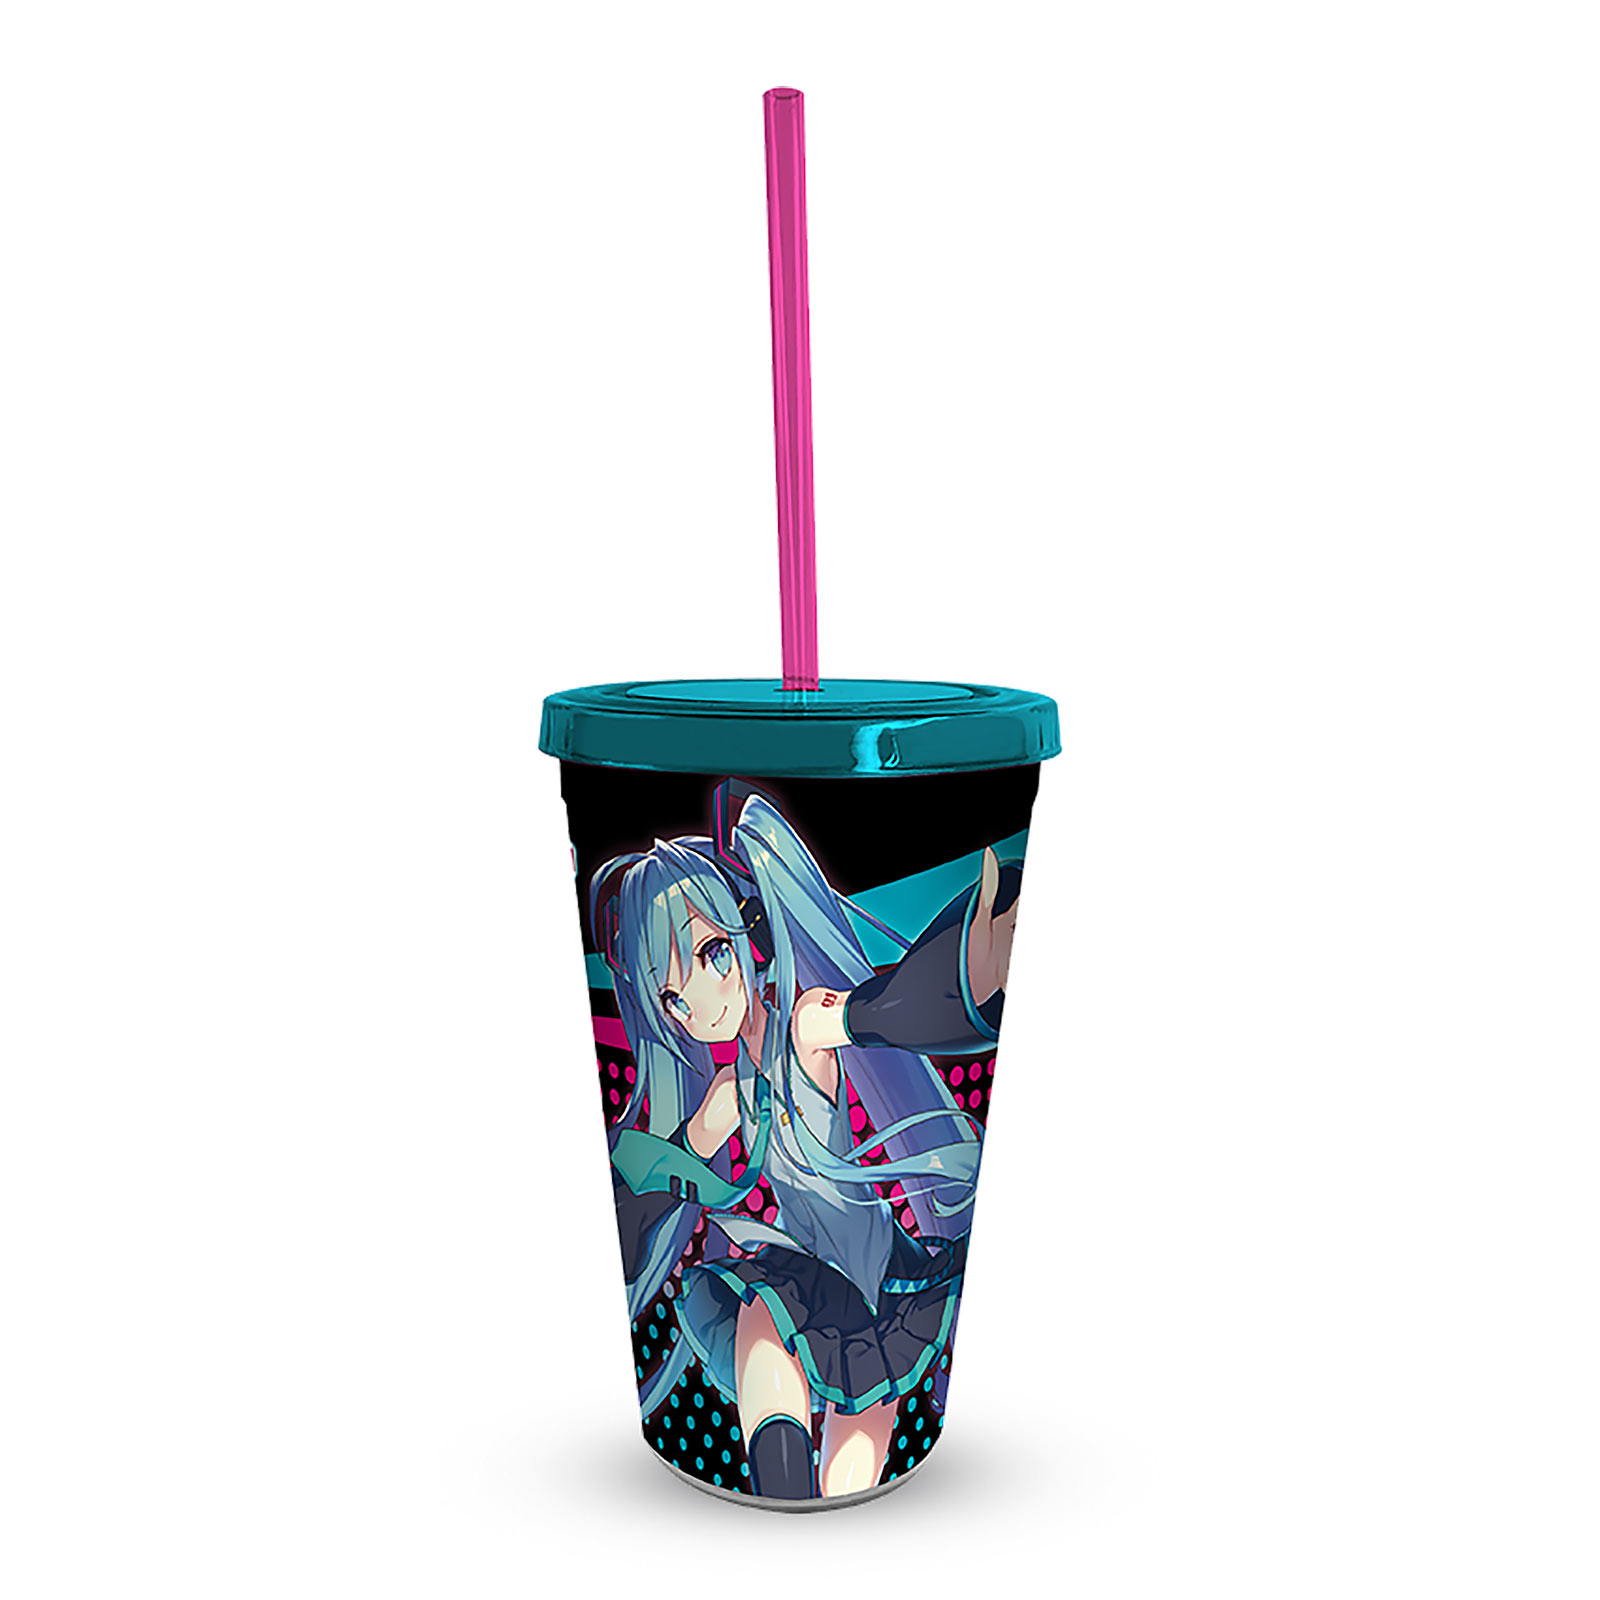 Hatsune Miku - Drinking Cup with Straw